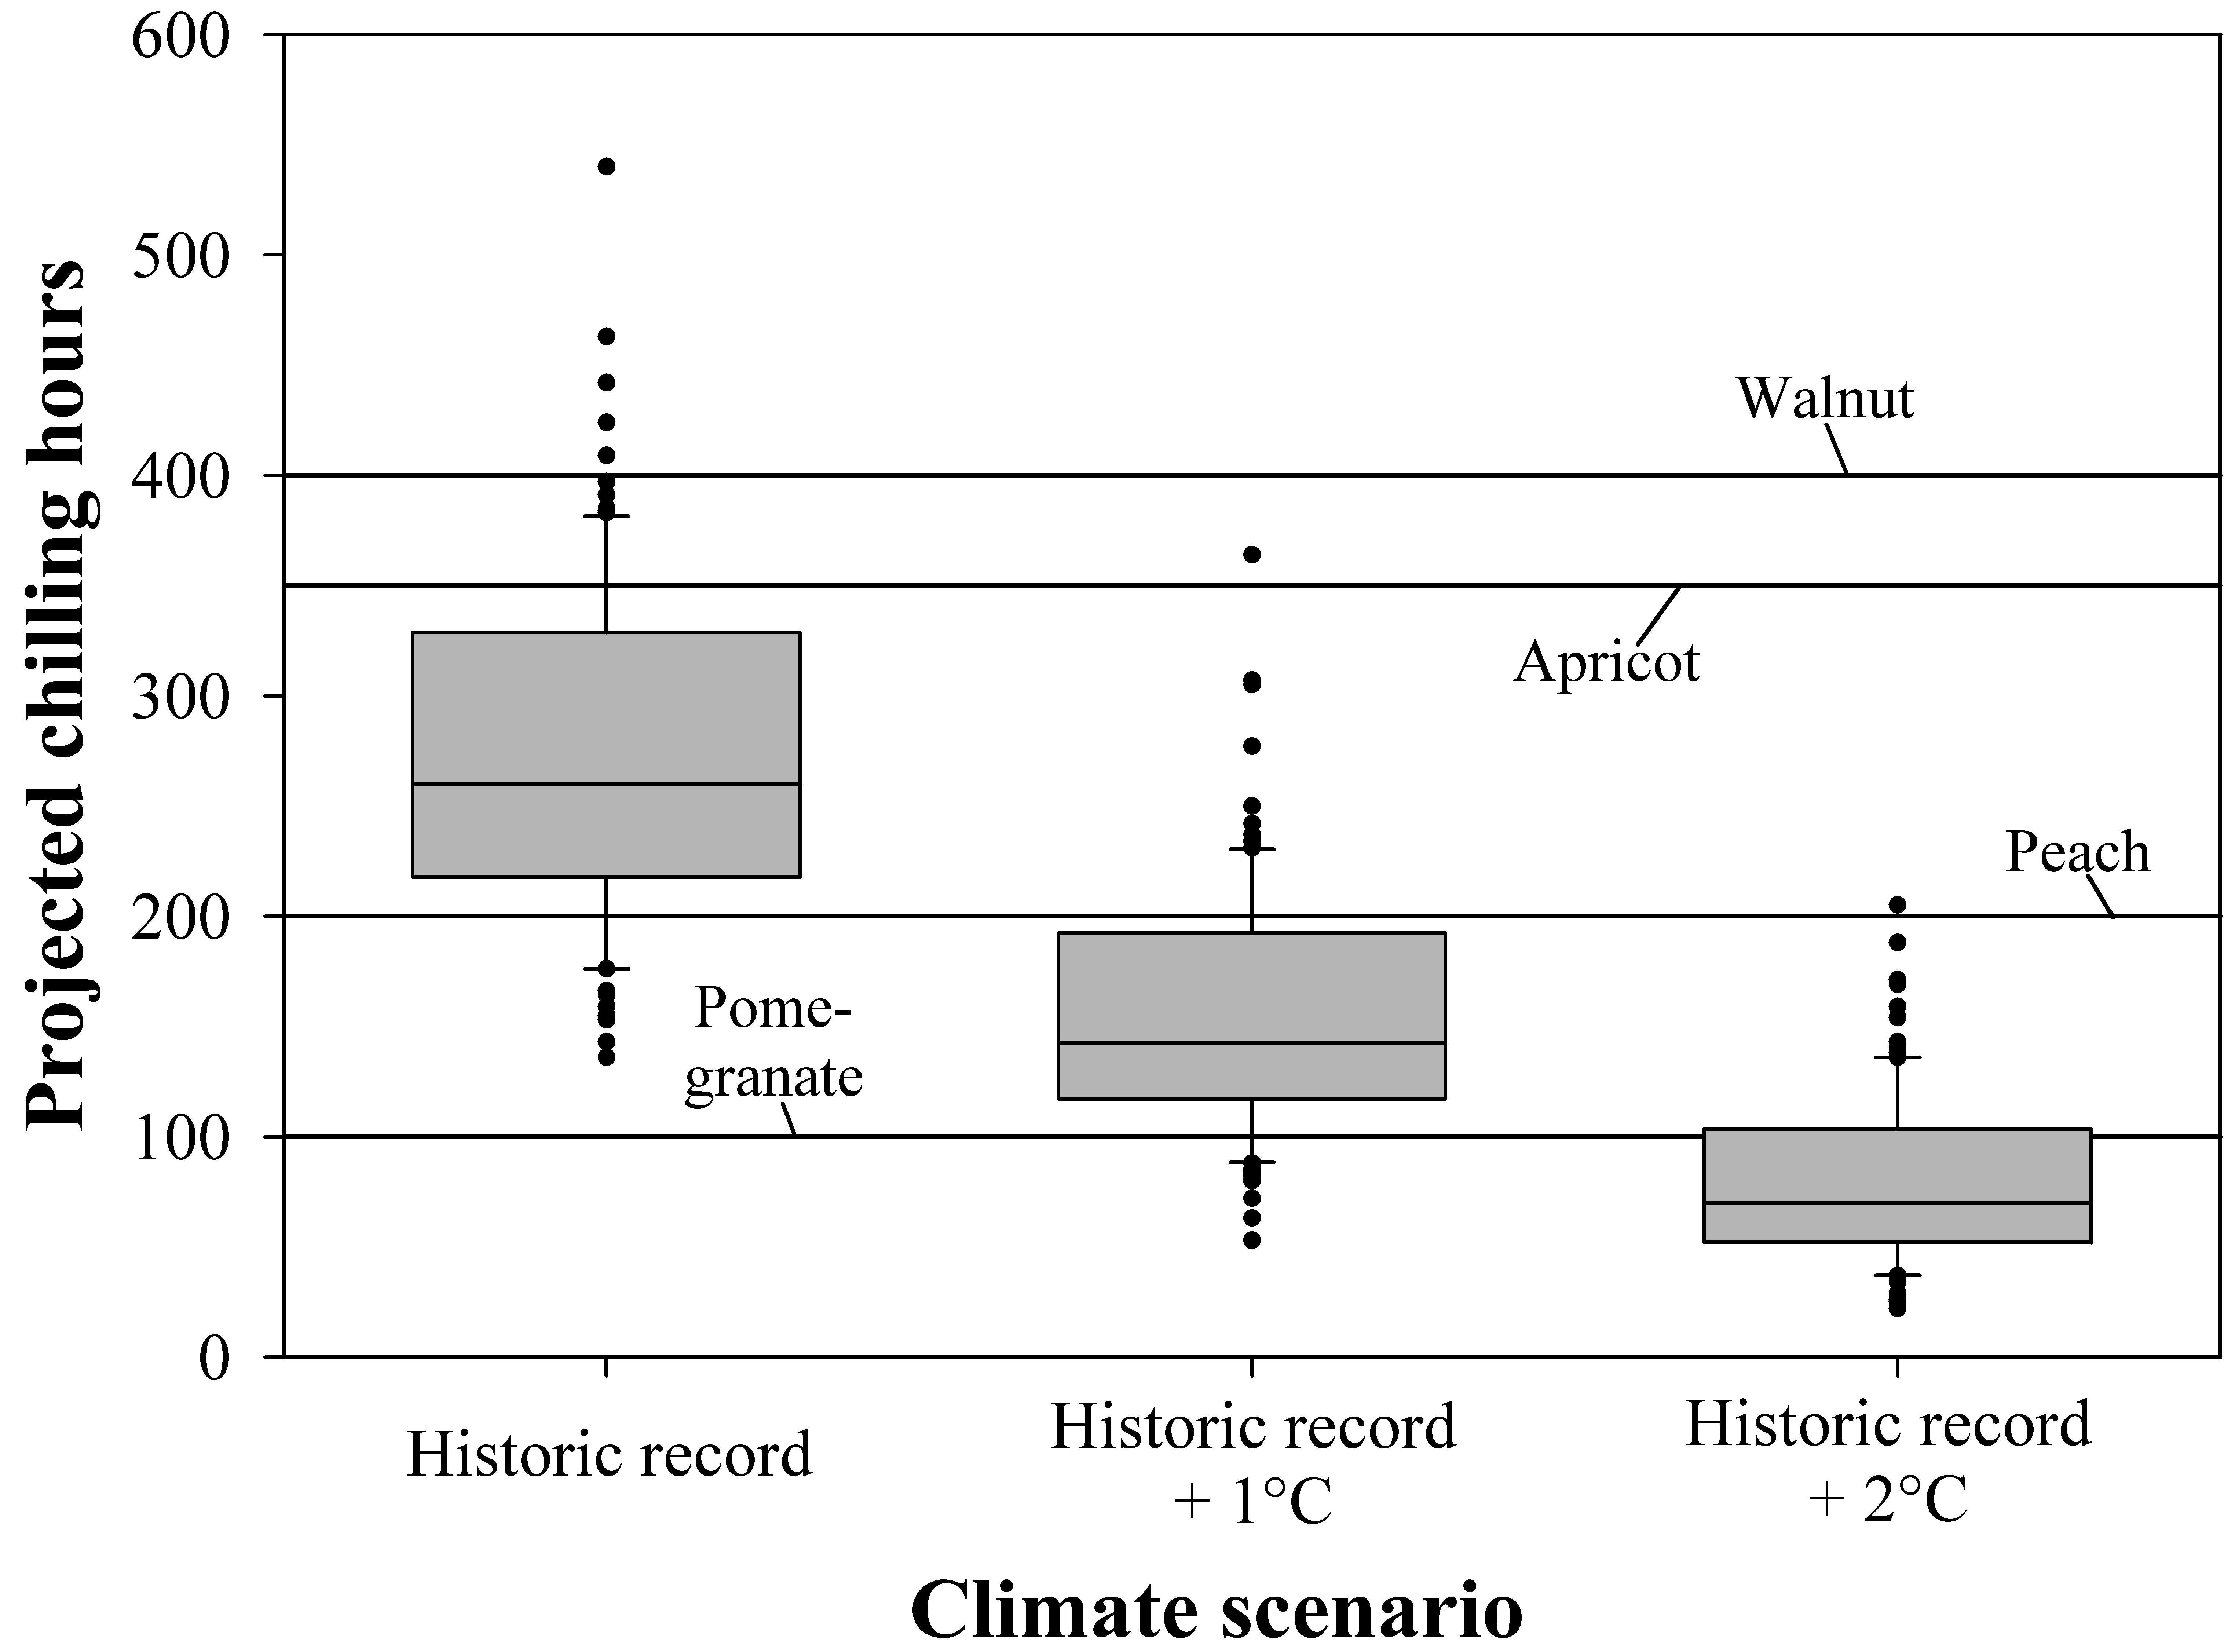 Chill scenarios for a mountain oasis in Oman according (Luedeling et al., 2009b)